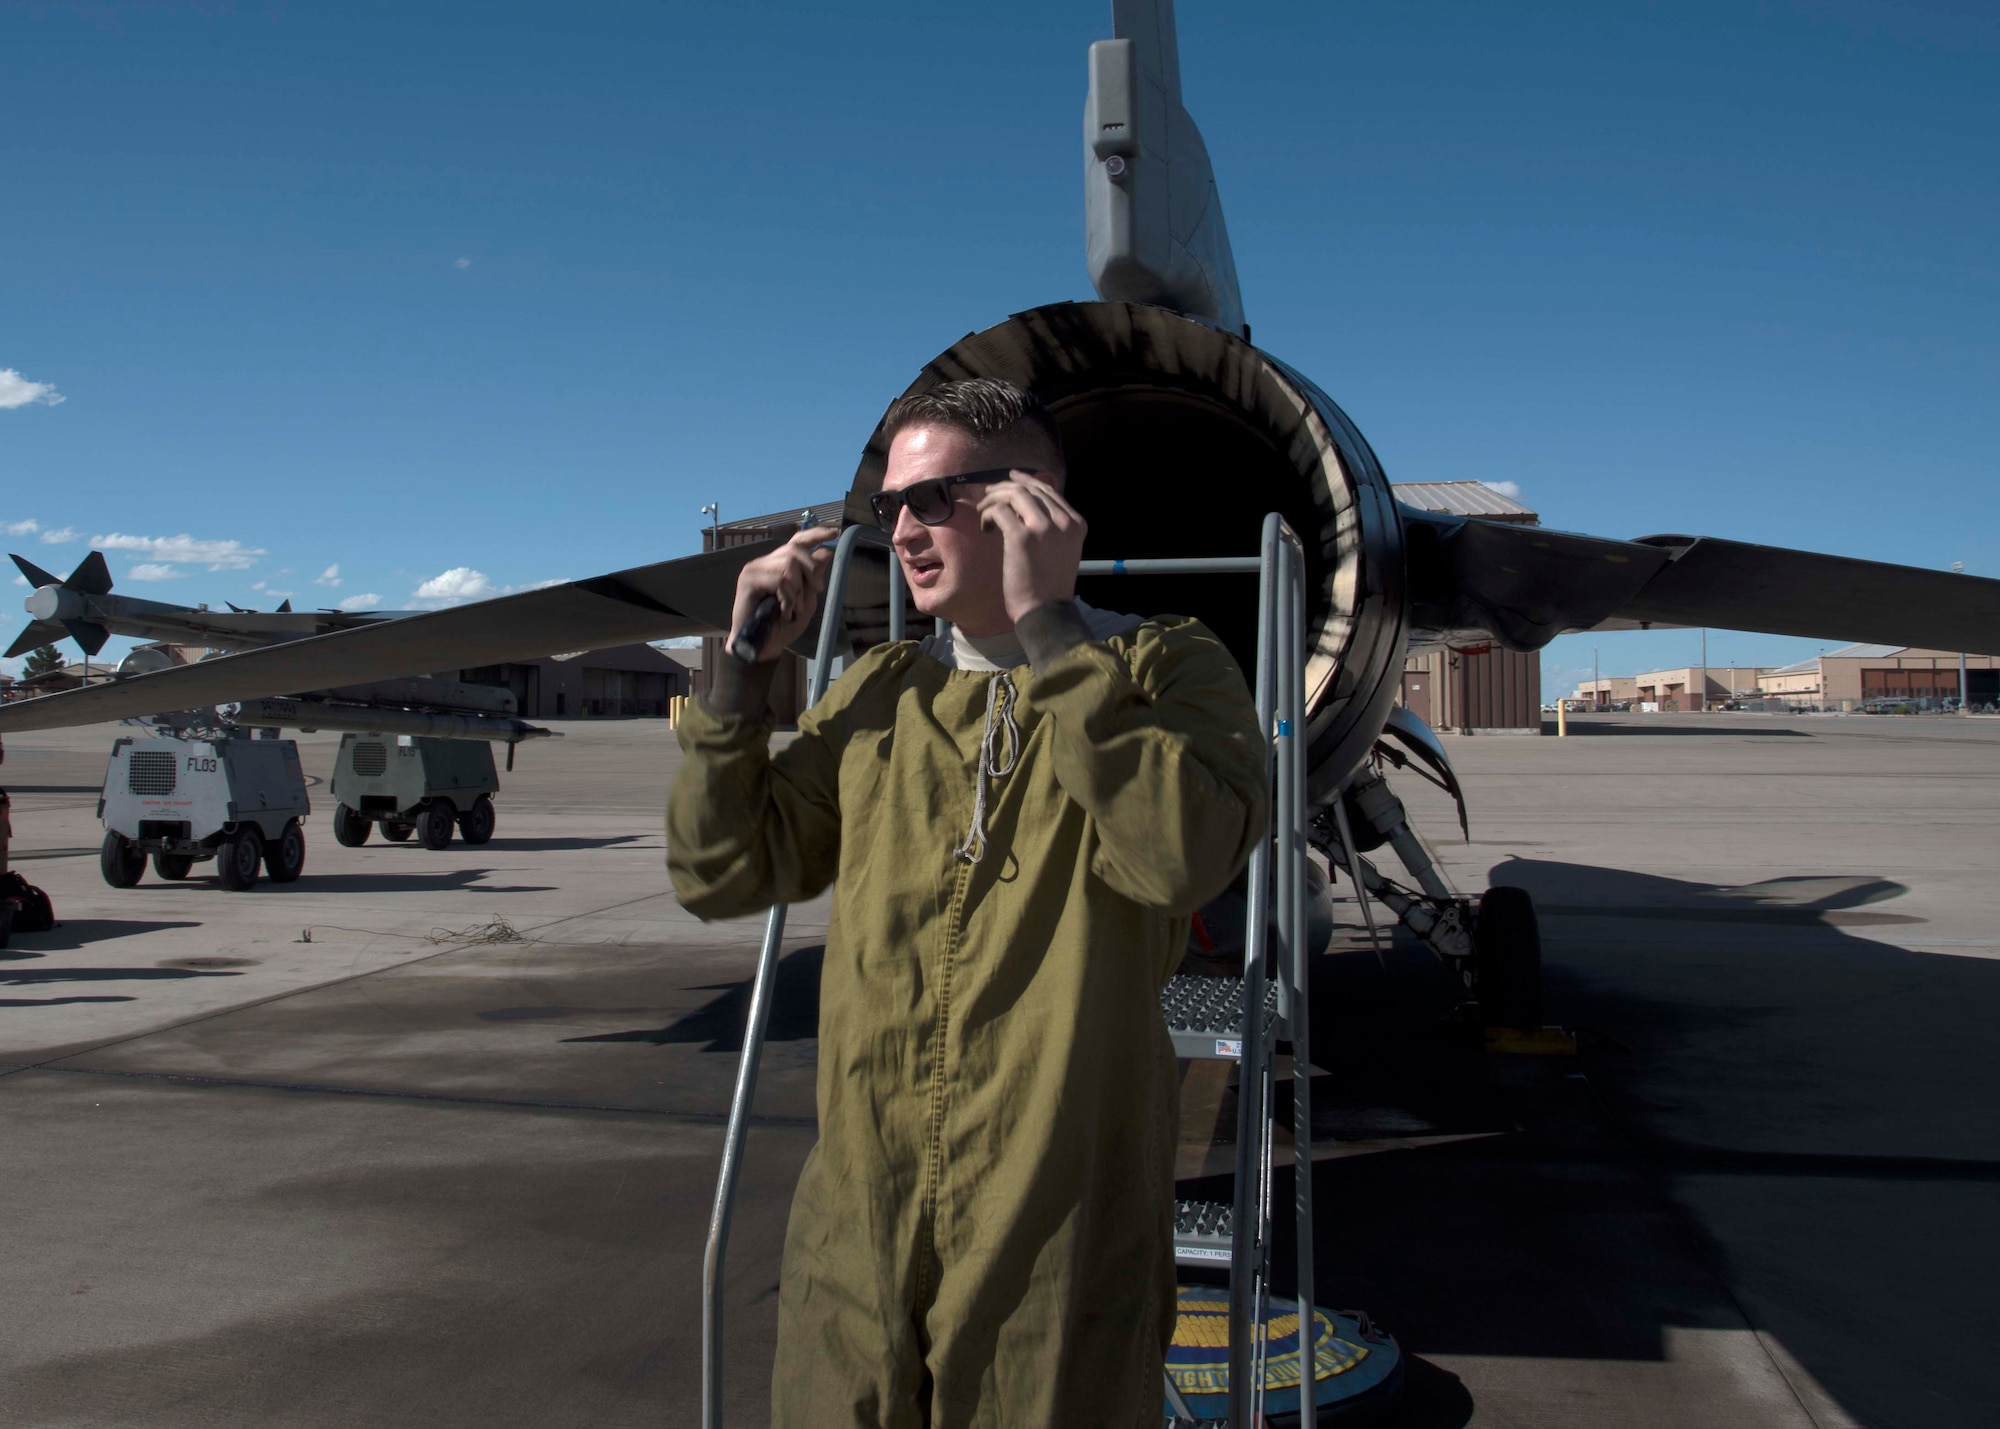 Tech. Sgt. Brandon Brittain, 311th Aircraft Maintenance Unit Dedicated Crew Chief, puts on sunglasses after climbing out of an F-16 Fighting Falcon exhaust Oct. 4 on Holloman Air Force Base, N.M. As a DCC, Brittain is assigned to a specific aircraft, and is responsible for all flight essential maintenance on his aircraft. (U.S. Air Force photo by Airman 1st Class Kindra Stewart)